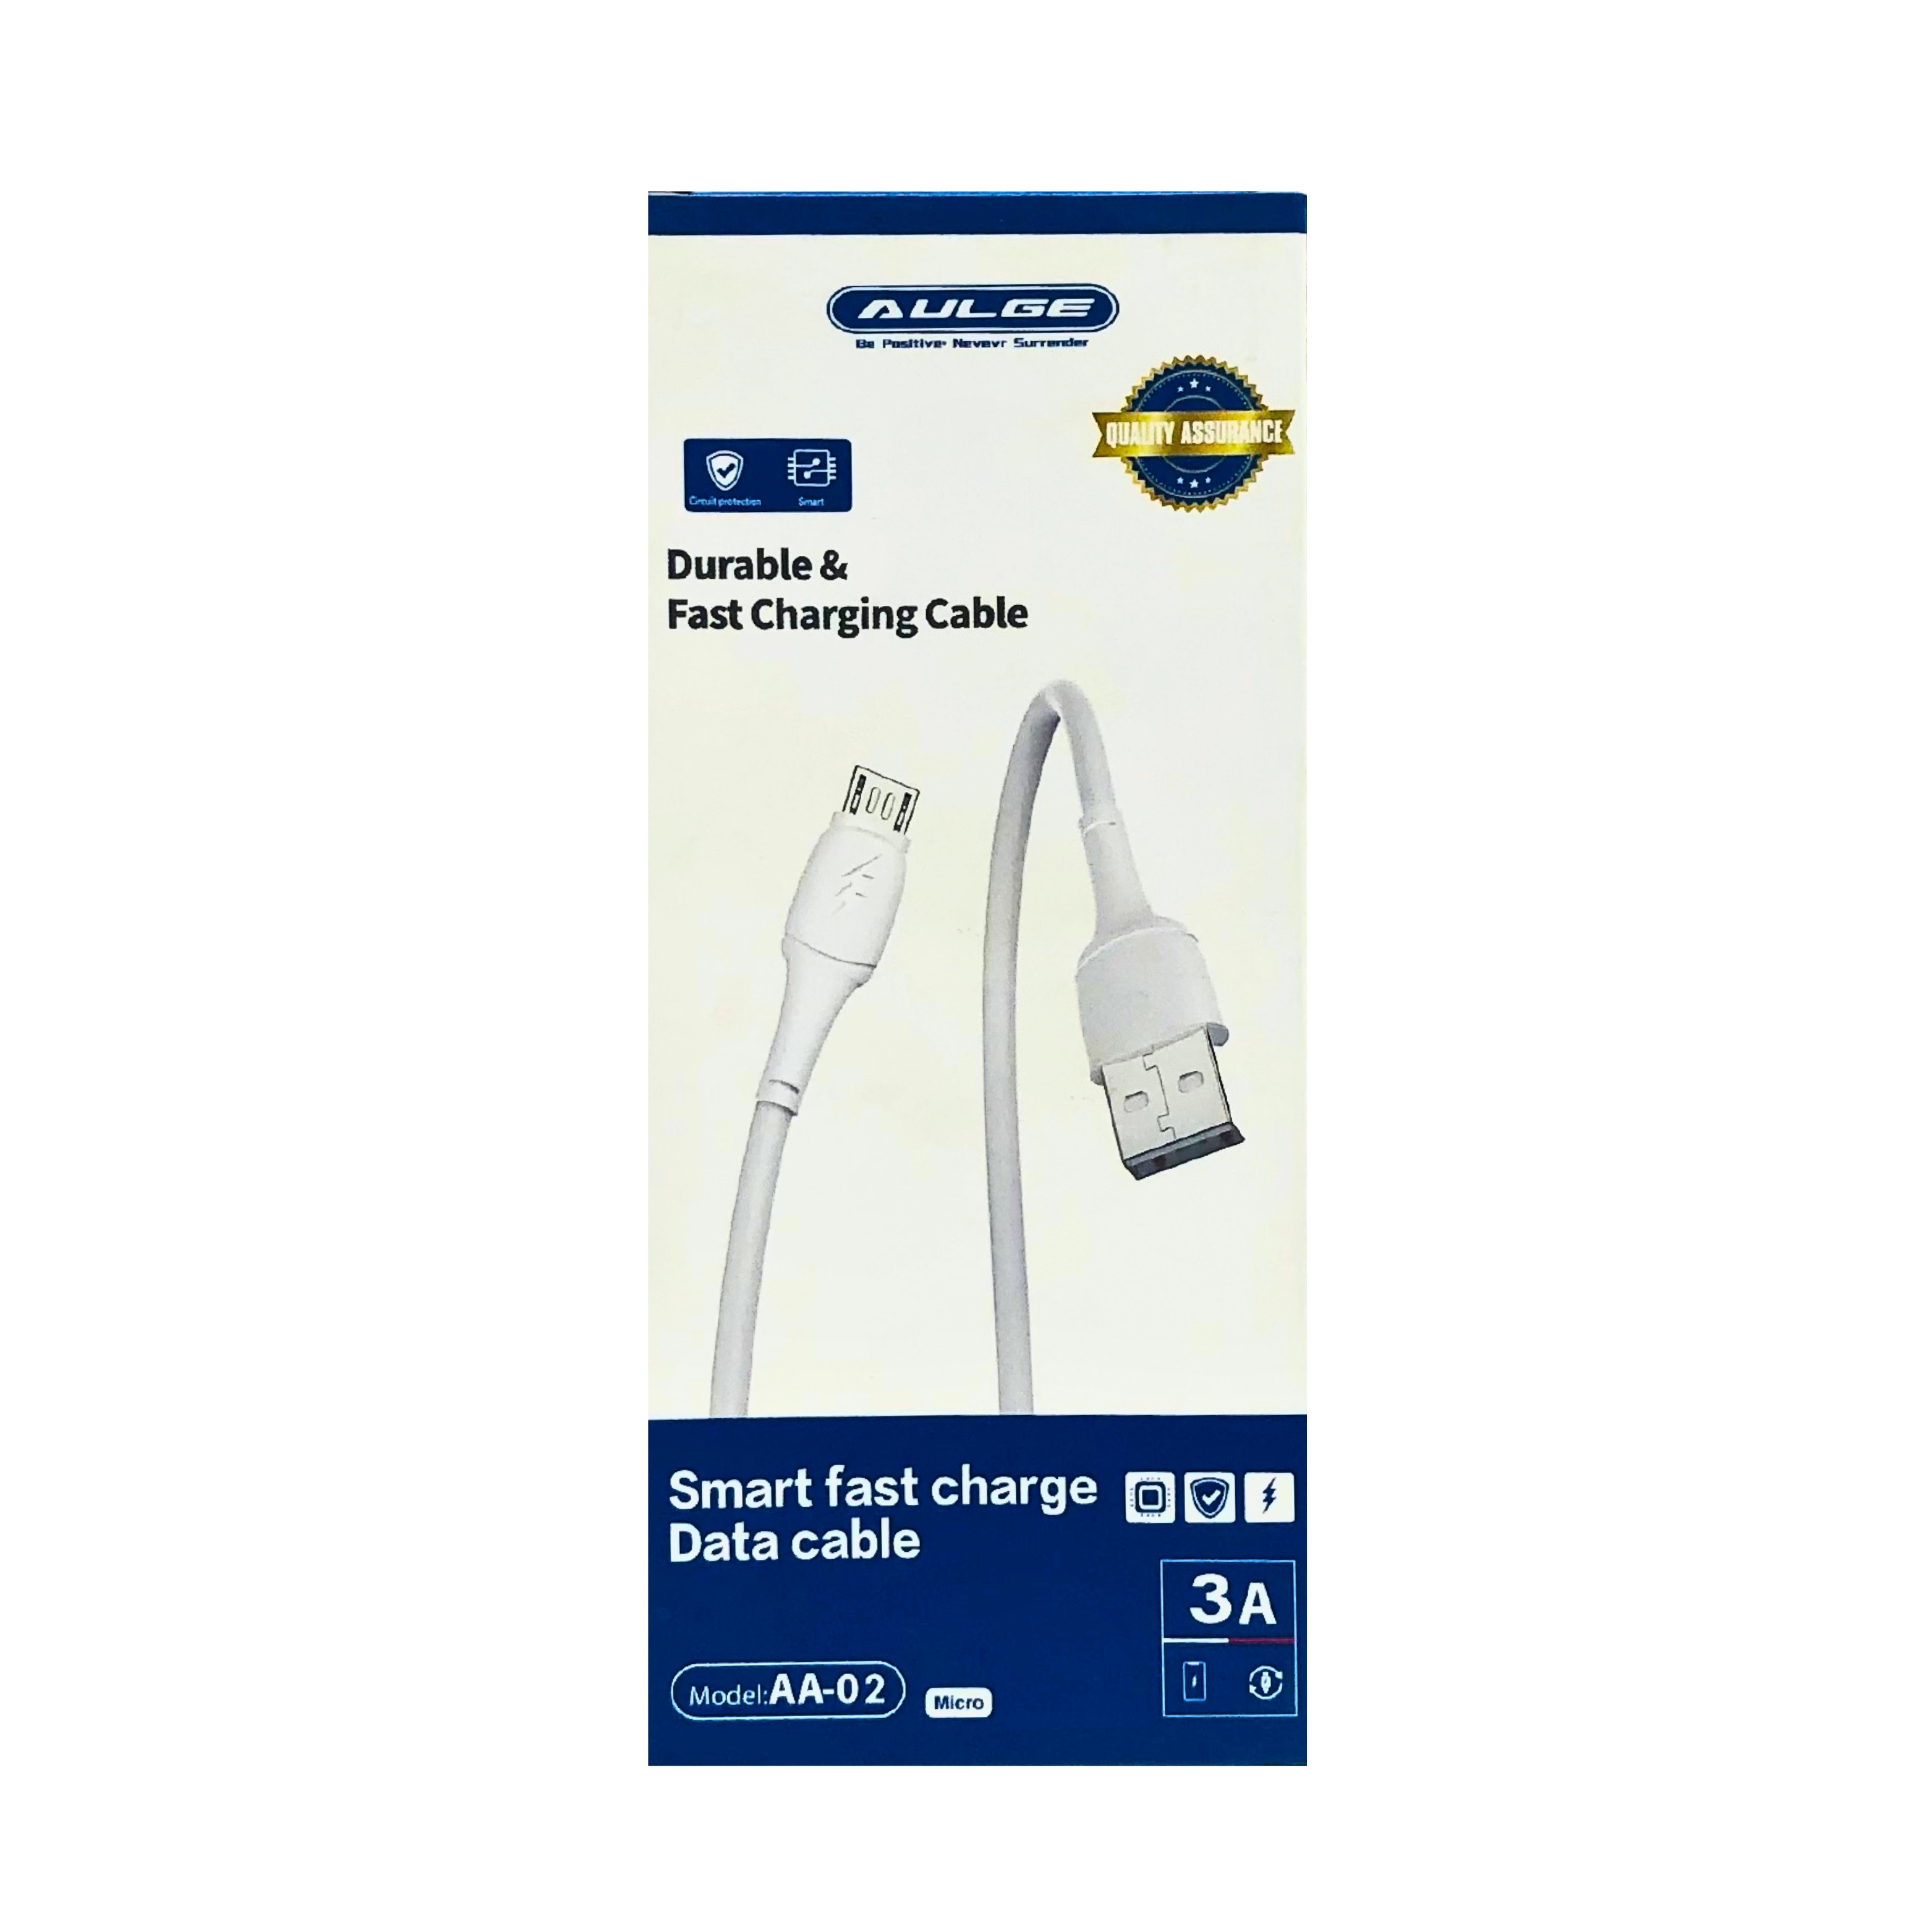 Charging cable (AA02 Micro) [DC AA02-1]